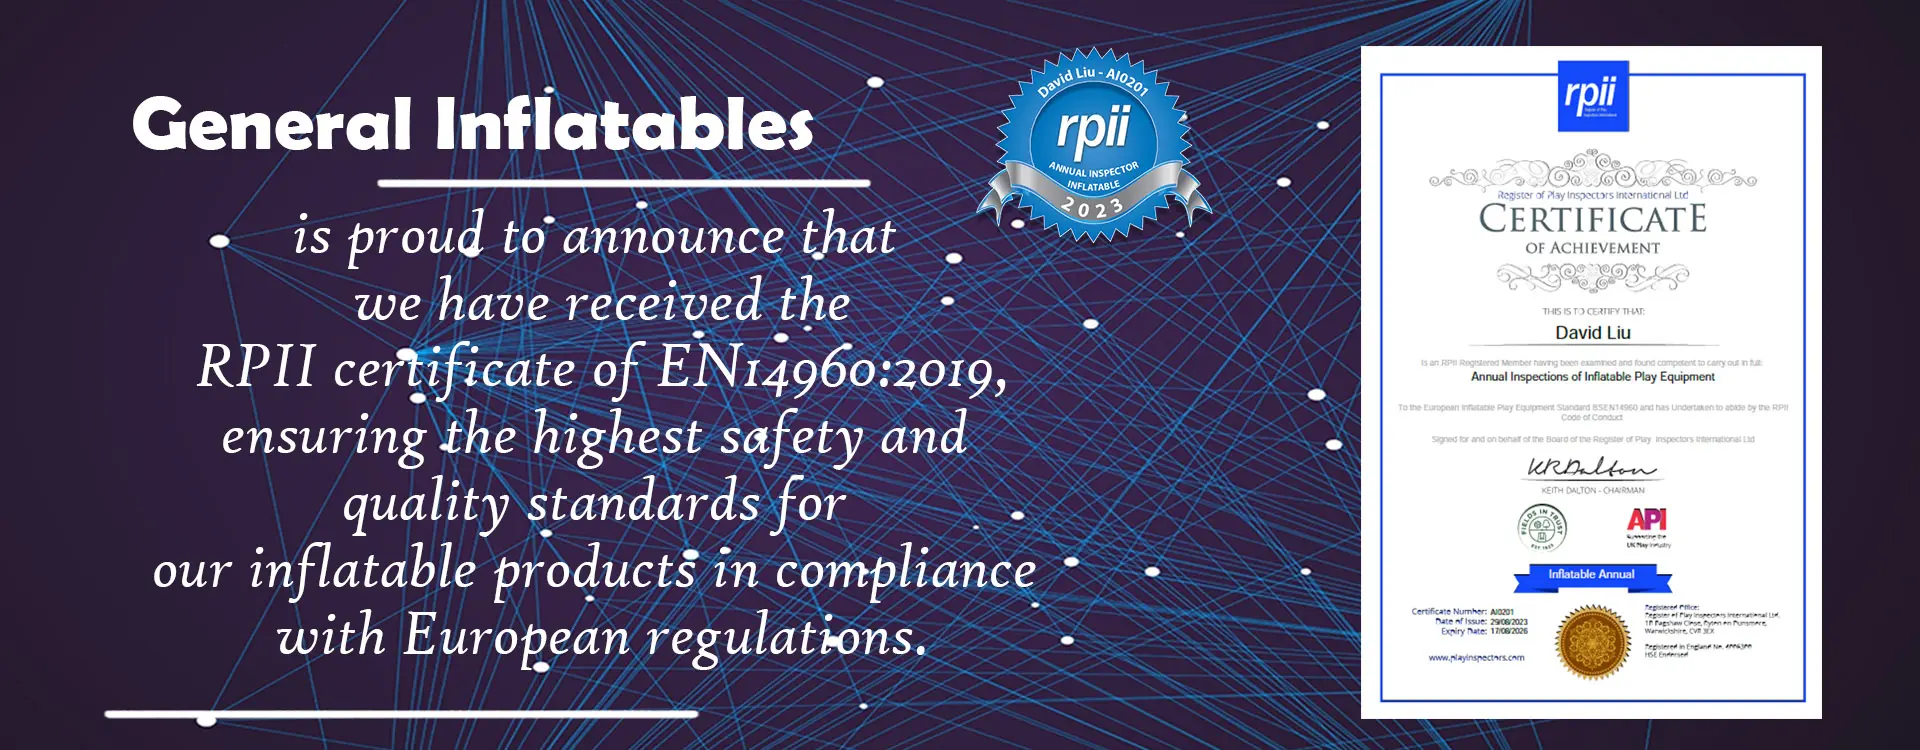 RPII Certificate of EN14960:2019 for Inflatable Products